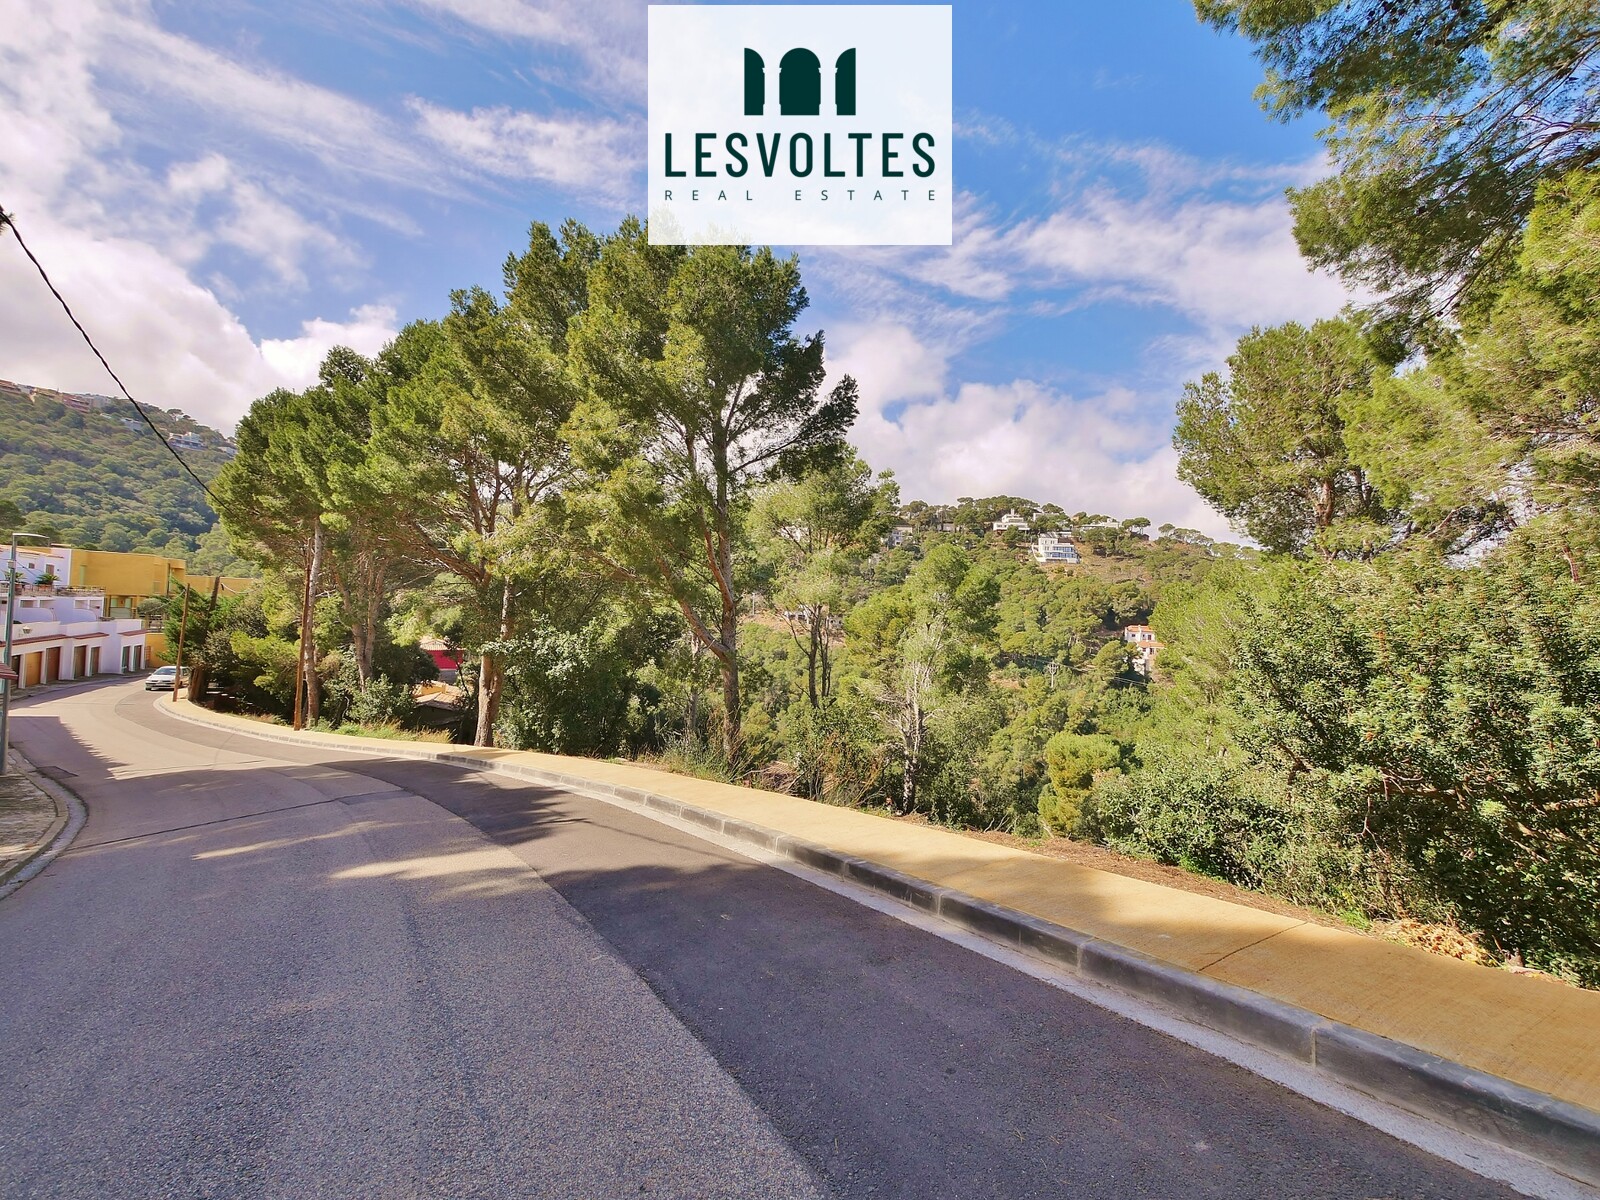 SET OF TWO PLOTS OF 883 M² LOCATED IN LA BORNA, BEGUR.